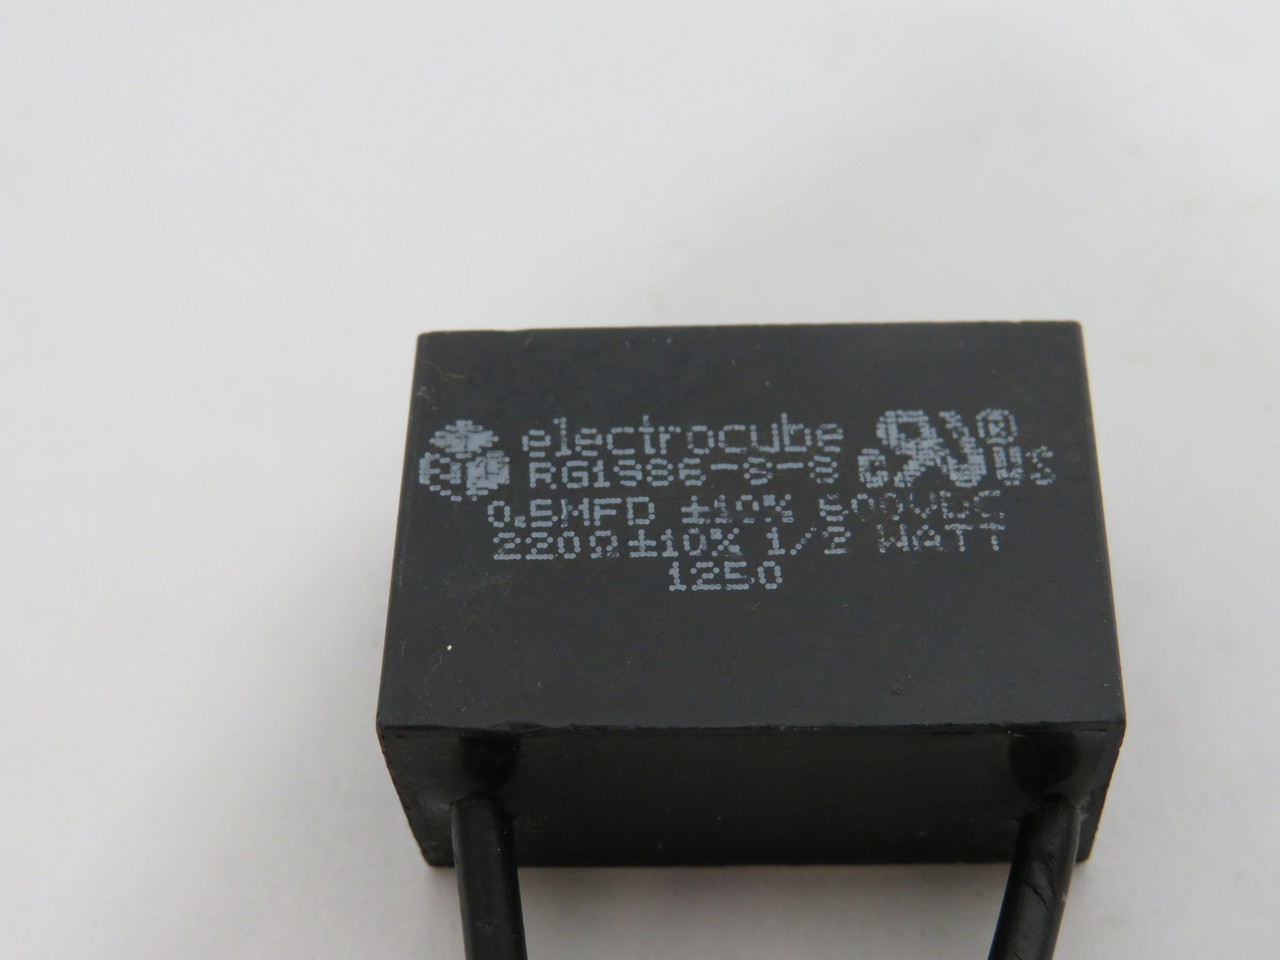 Electrocube RG1986-8-8 RC Network Capacitor 0.5MFD 10% 600VDC 1/2W 220Ohms USED